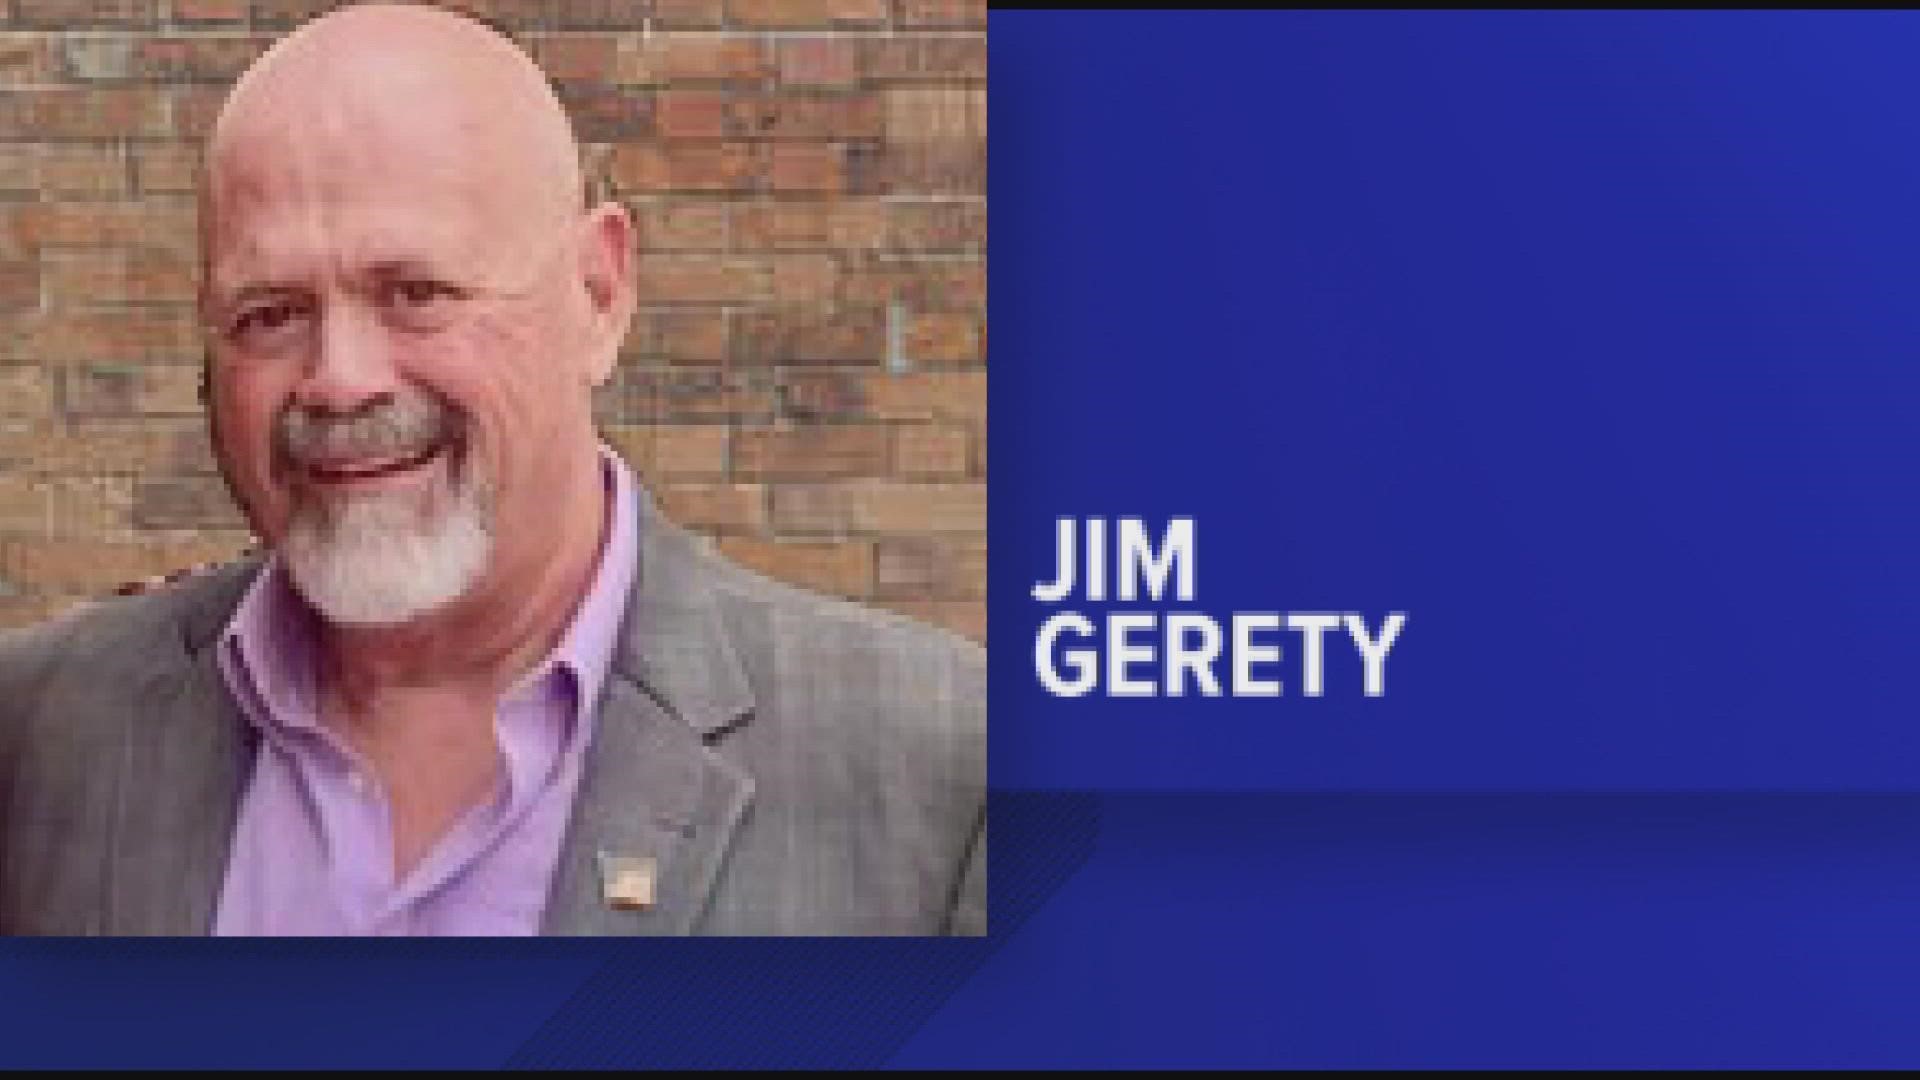 Gerety says he wants to use his leadership skills to benefit fellow residents in District 4.